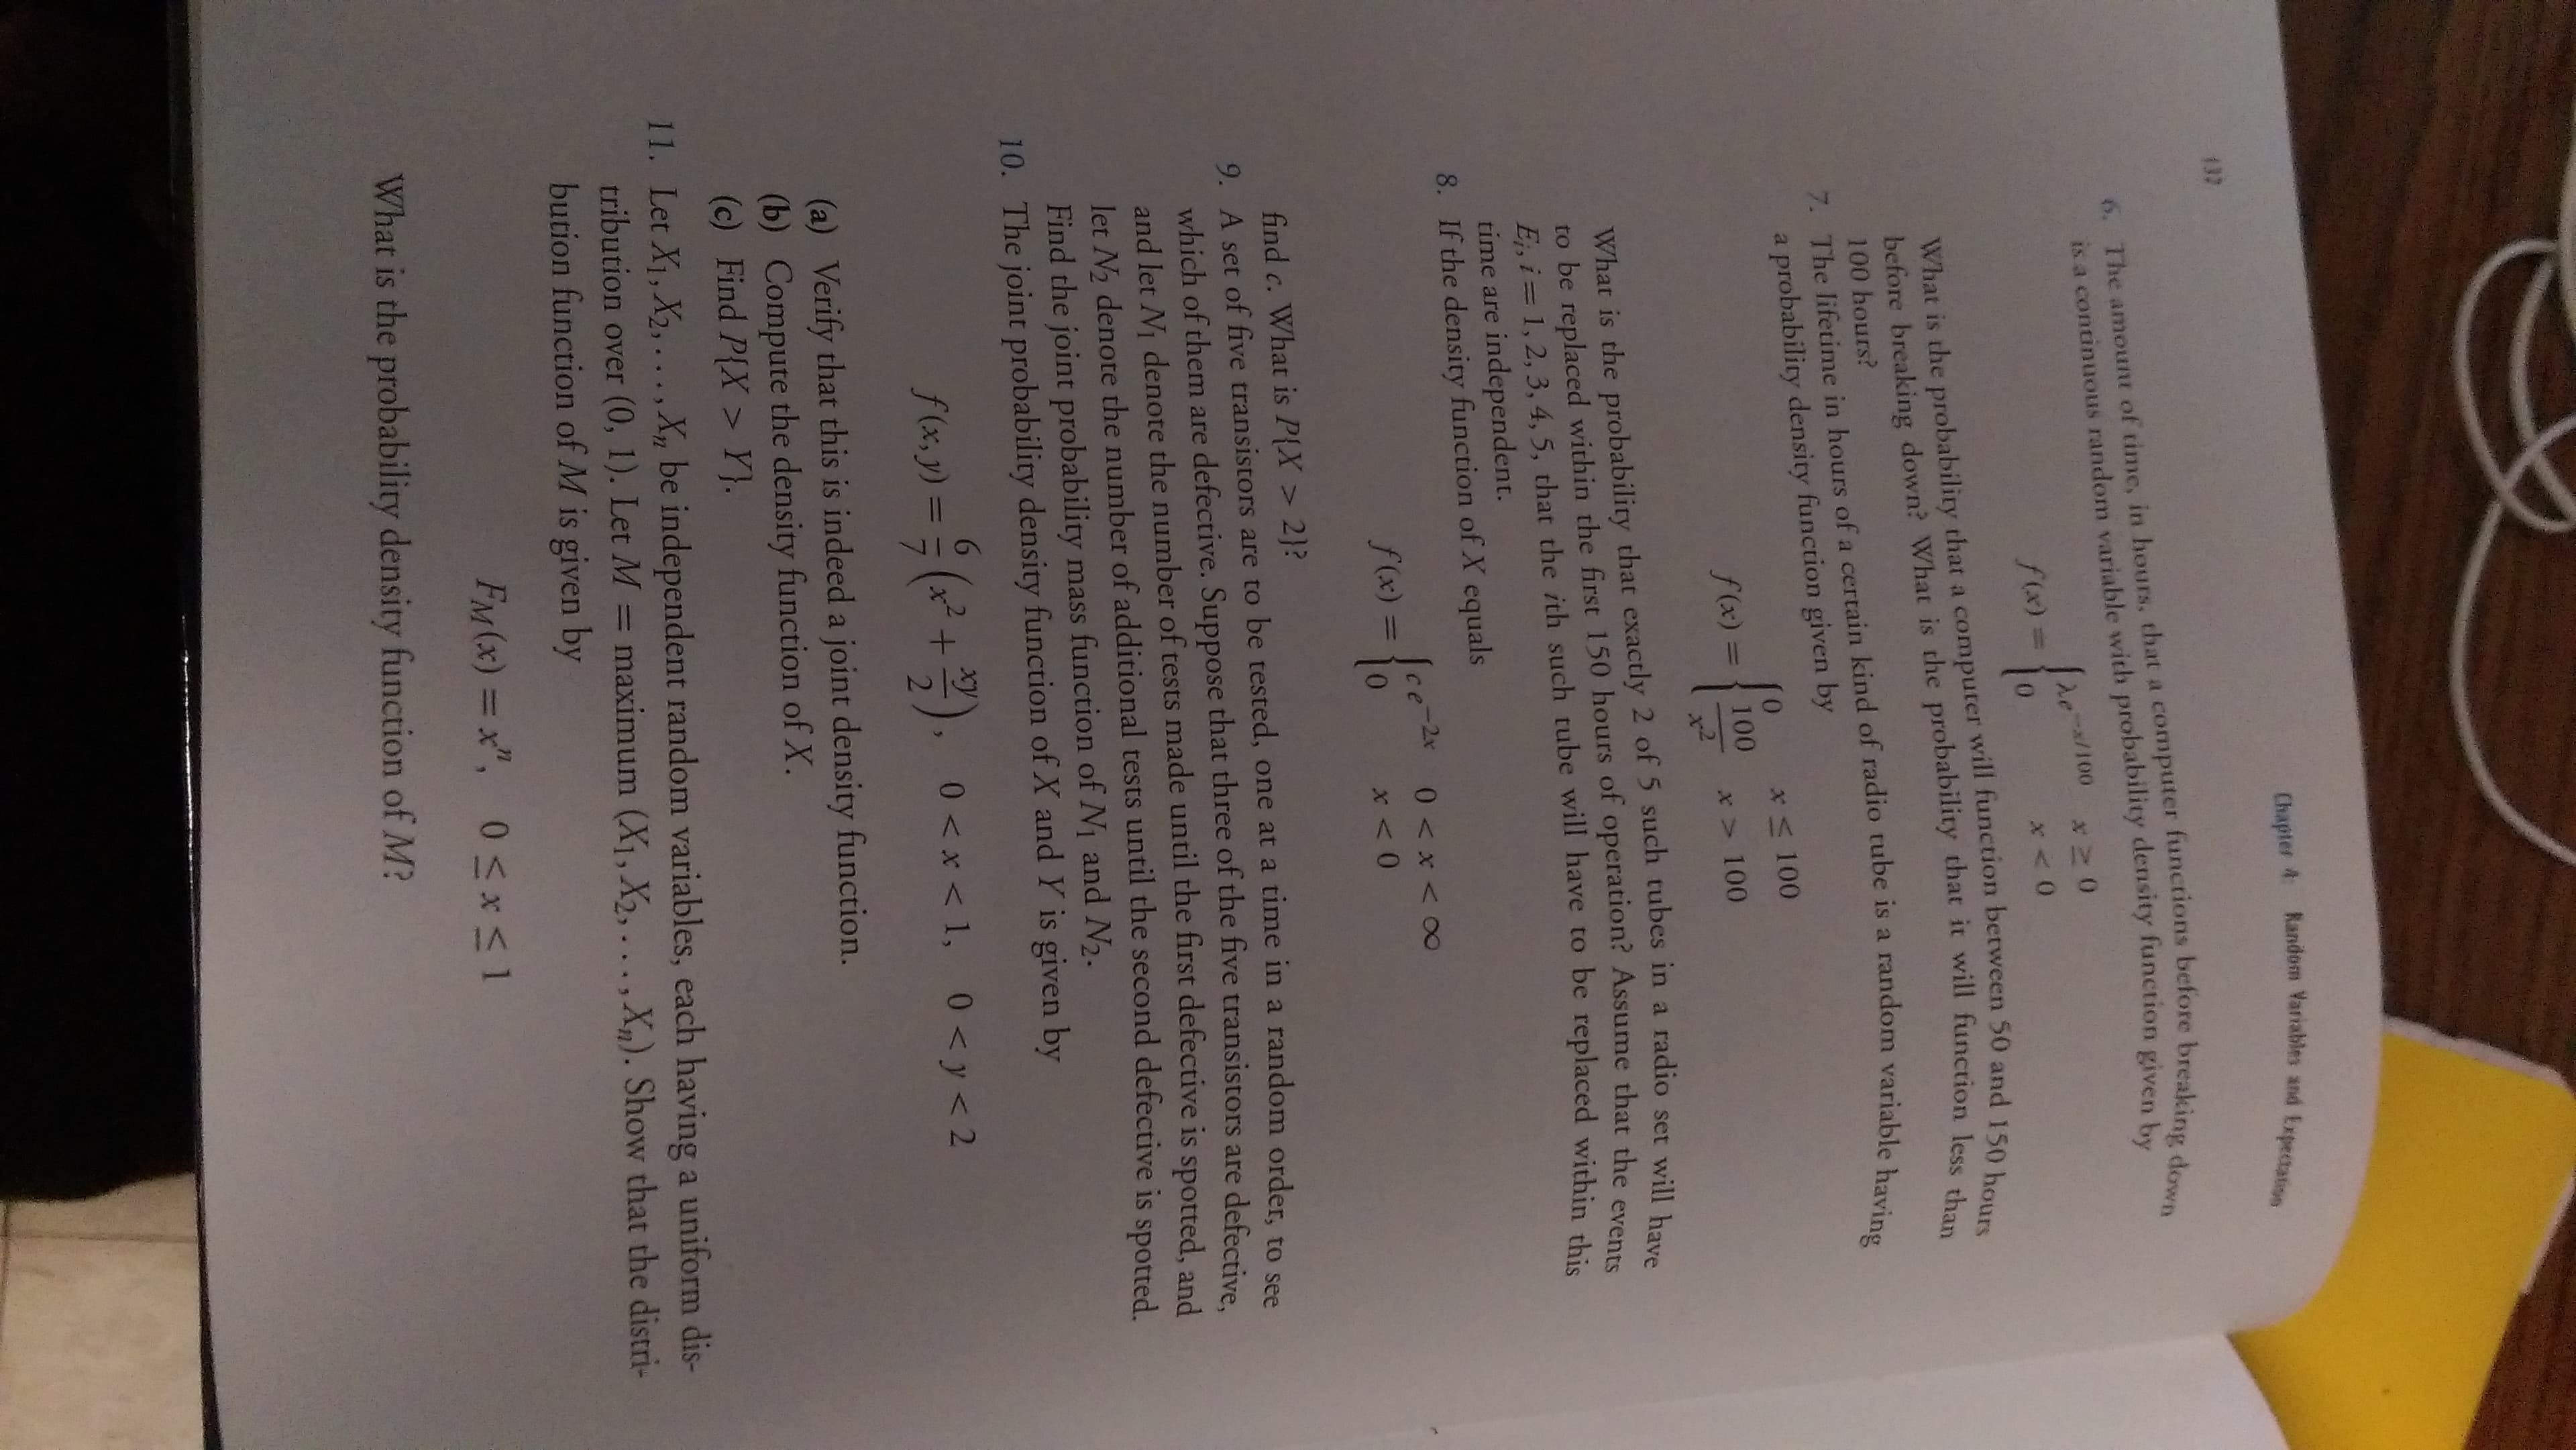 Chapter 4 Random Variables and Expectation
137
6. The amount of time, in hours, that a computer functions before breaking down
is a continuous random variable with probability density function given by
de/100
f(x)%3D
What is the probability that a computer will function between 50 and 150 hours
before breaking down? What is the probability that it will function less than
100 hours?
7. The lifetime in hours of a certain kind of radio tube is a random variable having
a probability density function given by
x 100
f (x) =
100
*> 100
What is the probability that exactly 2 of 5 such tubes in a radio set will have
to be replaced within the first 150 hours of operation? Assume that the events
E, i= 1, 2, 3, 4, 5, that the ith such tube will have to be replaced within thi
time are independent.
8. If the density function of X equals
Ice-2 0 x<00
f(x) = {
x <0
find c. What is P{X > 2}?
9. A set of five transistors are to be tested, one at a time in a random order to pe
which of them are defective. Suppose that three of the five transistors are defective
and let N denote the number of tests made until the first defective is spotted, and
let No denote the number of additional tests until the second defective is Spotted
Find the joint probability mass function of N1 and N2.
10. The joint probability density function of X and Y is given by
S6,2) = (* +).
xy
f(x, y) =
0 < x < 1, 0 < y< 2
%3D
(a) Verify that this is indeed a joint density function.
(b) Compute the density function of X.
(c) Find P{X > Y}.
11. Let X1, X2,. .., X, be independent random variables, each having a uniform dis-
tribution over (0, 1). Let M = maximum (X1, X2,...,X). Show that the distri-
bution function of M is given by
FM(x) = x", 0*1
What is the probability density function of M?
